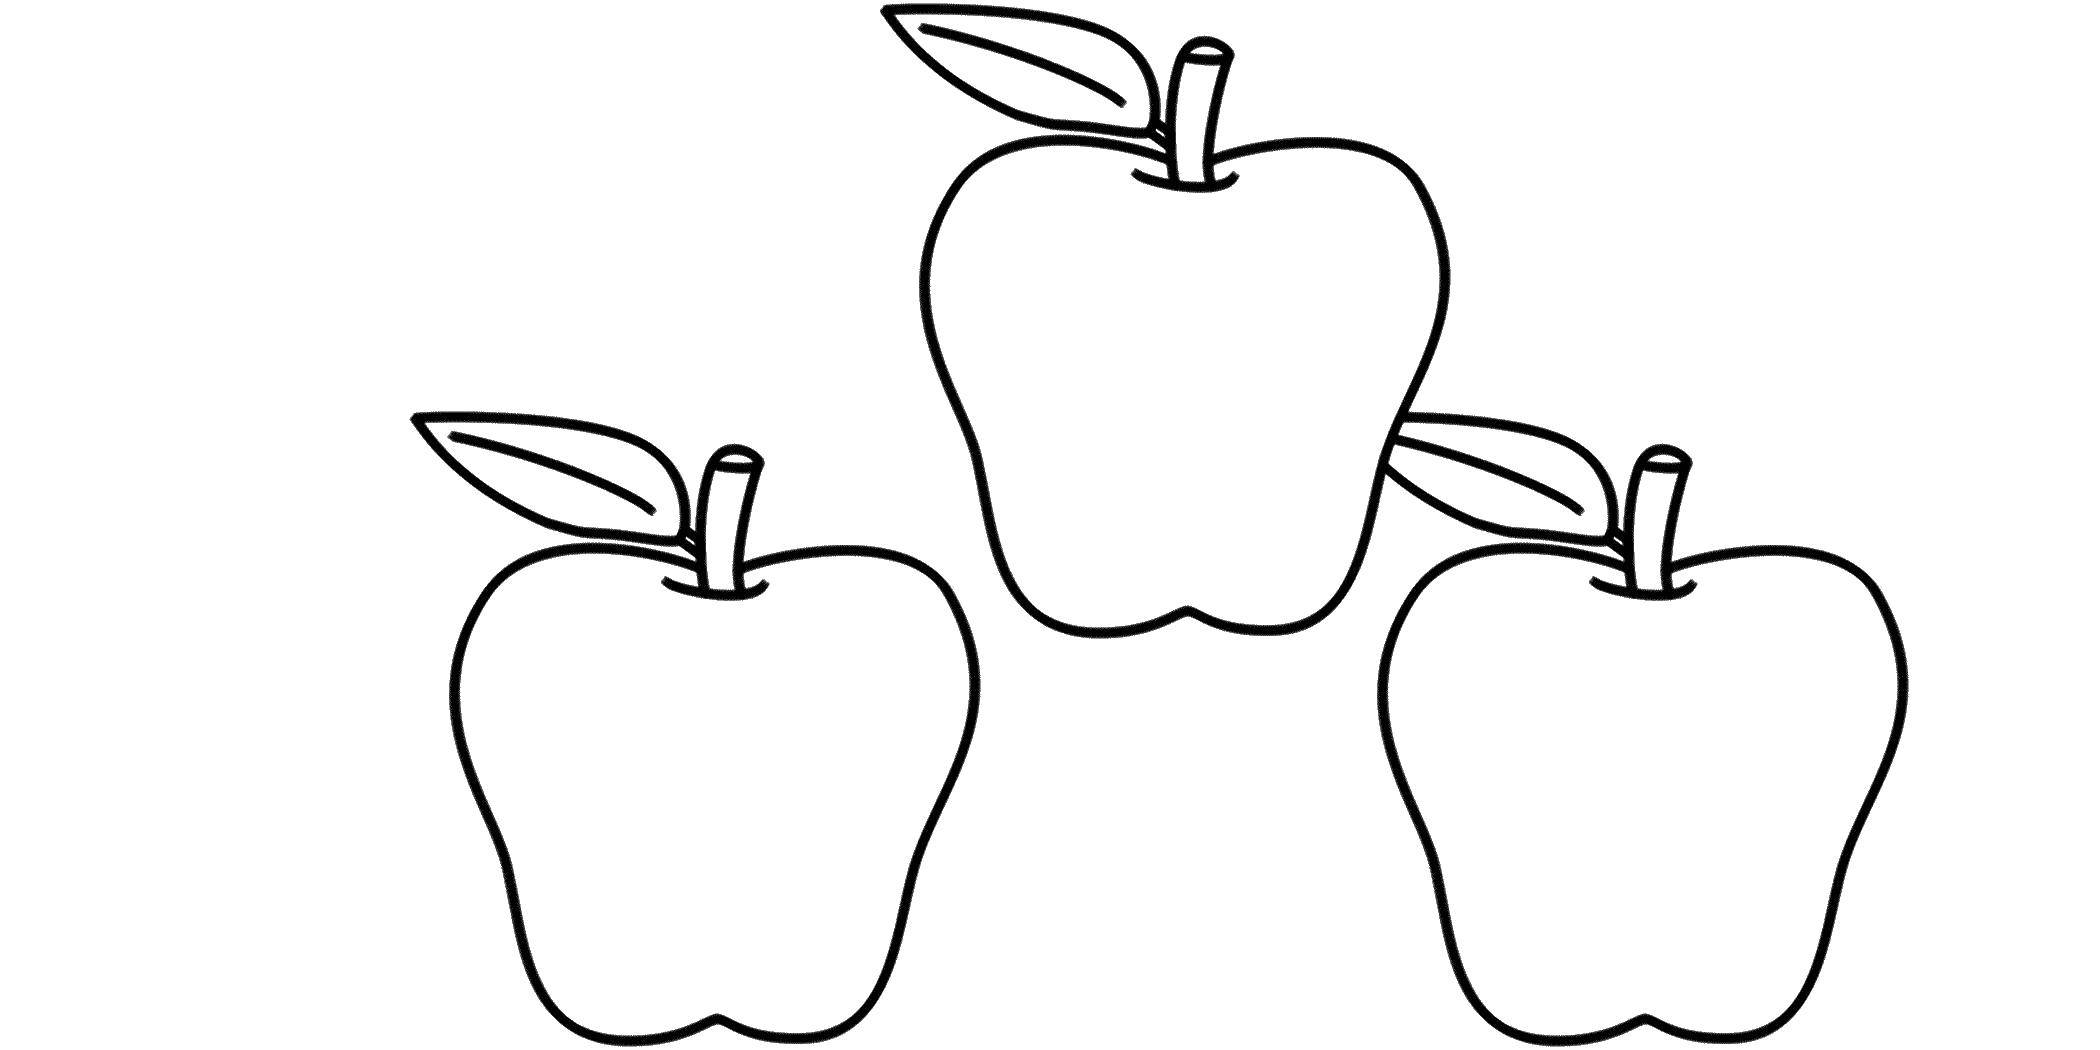 Coloring Apples. Category fruits. Tags:  Apple, fruit.